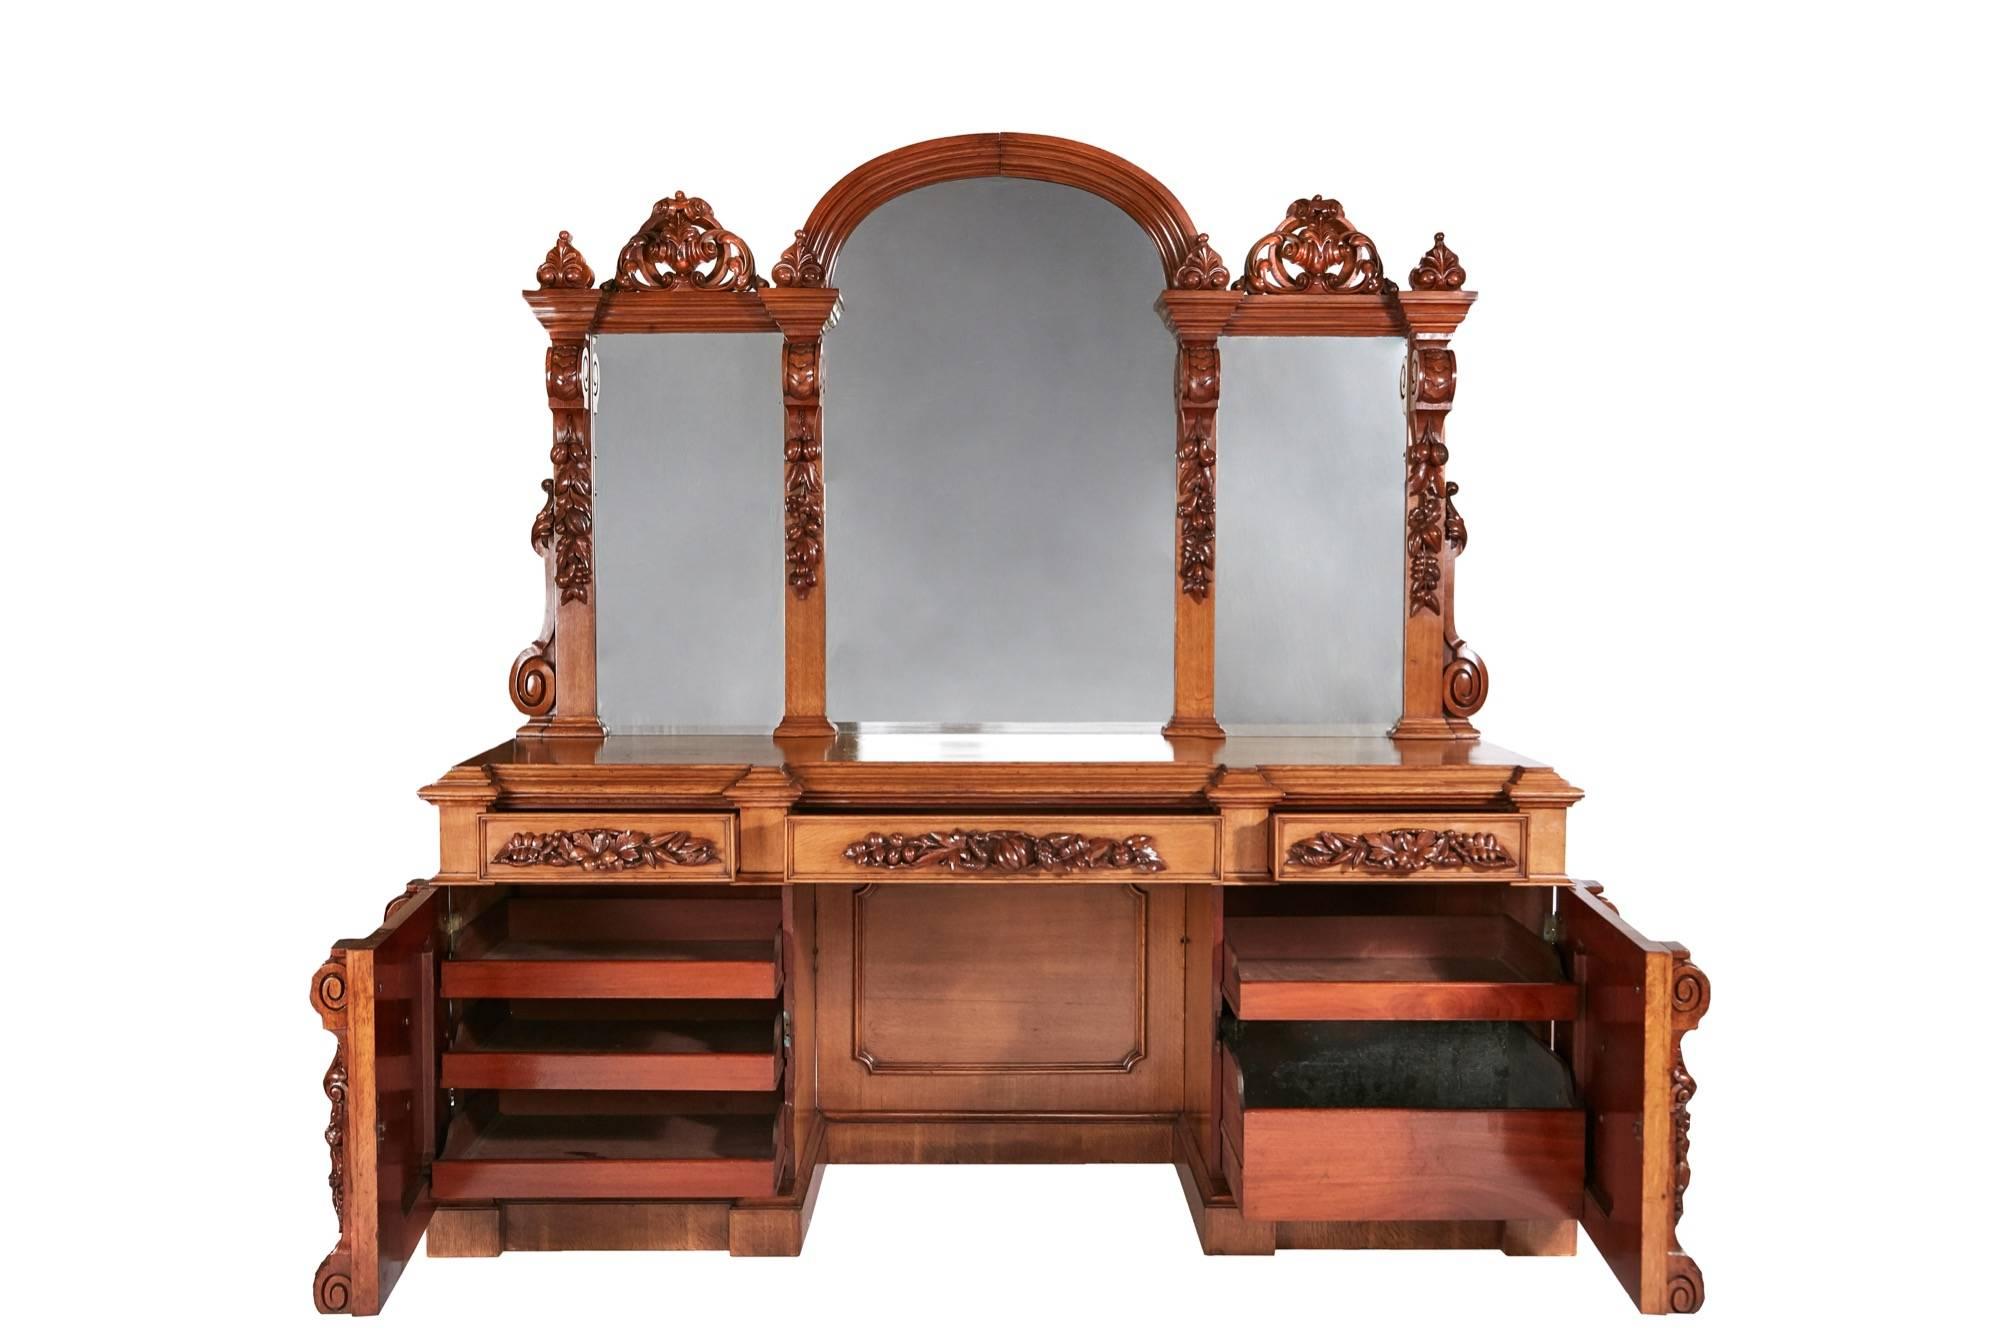 Outstanding large Victorian carved oak mirror back sideboard, having a large mirror back carved with pears, apples and fruits, the base with three carved frieze drawers, two cupboard doors with carved grapes to the centre, fitted interior, standing